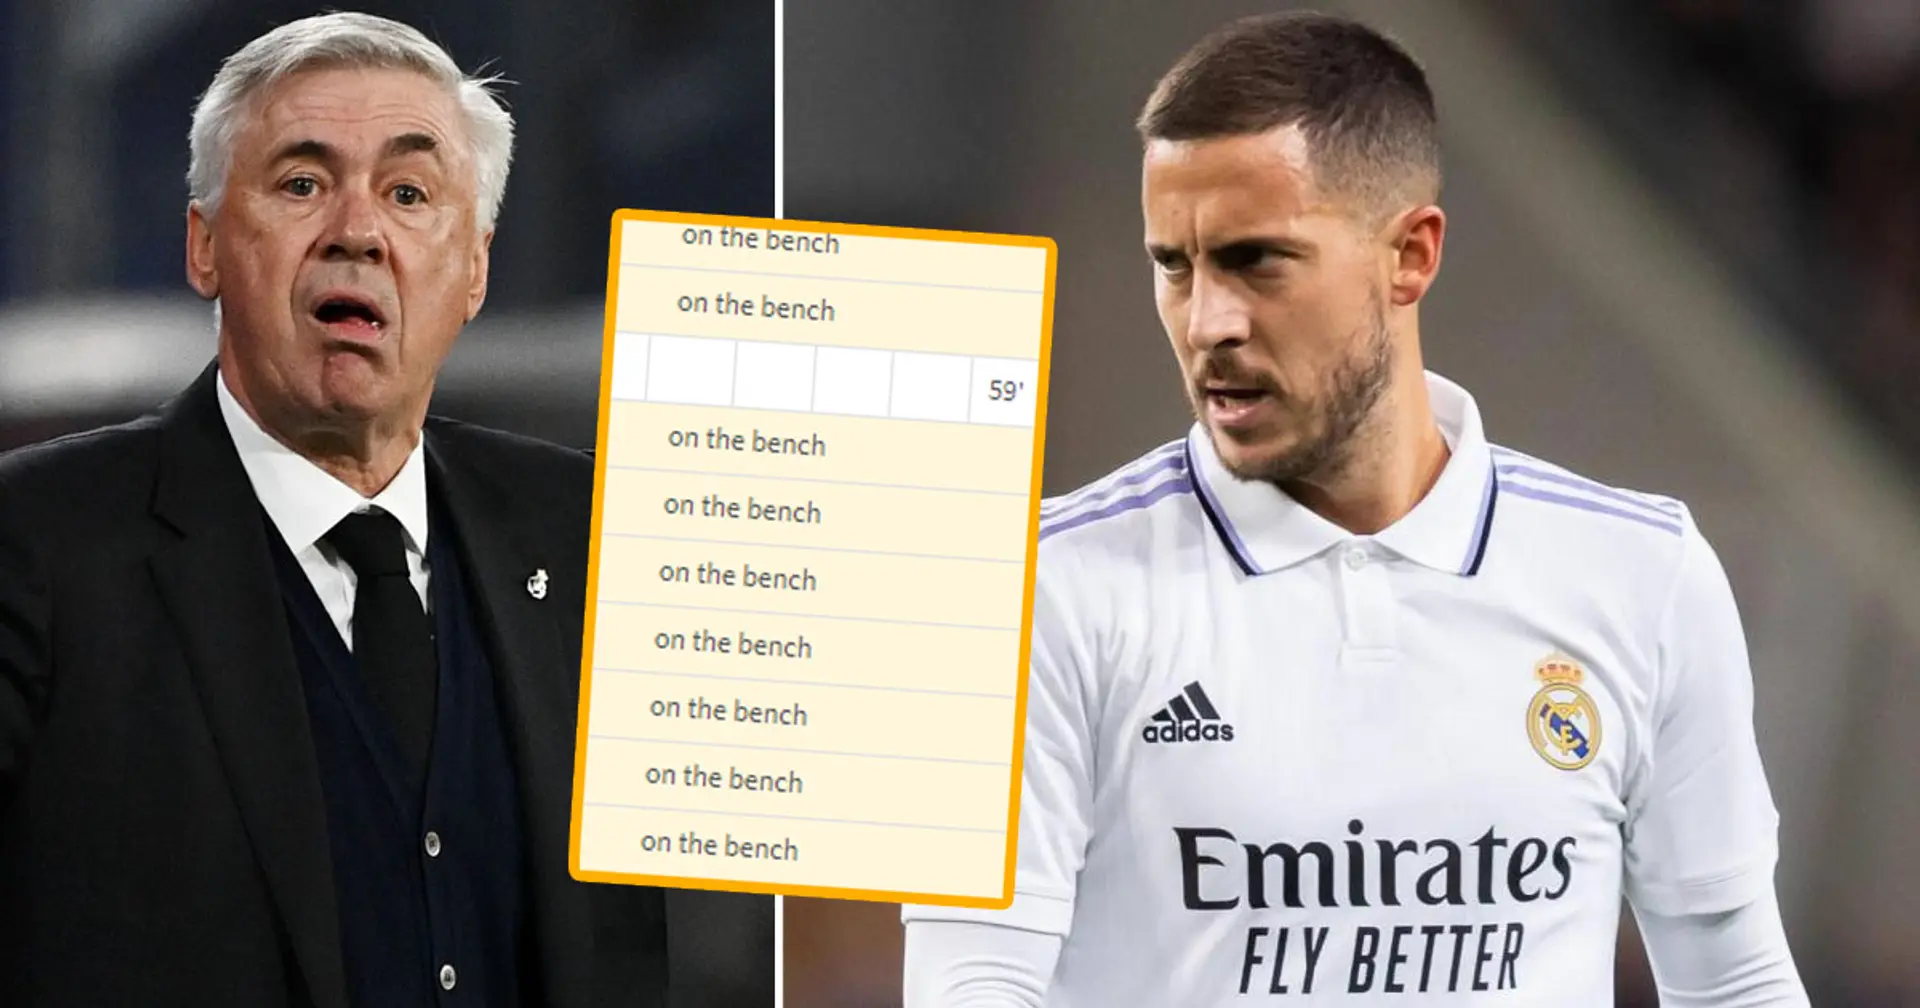 Real Madrid lose faith in Hazard, will ship him away in summer (reliability: 5 stars)